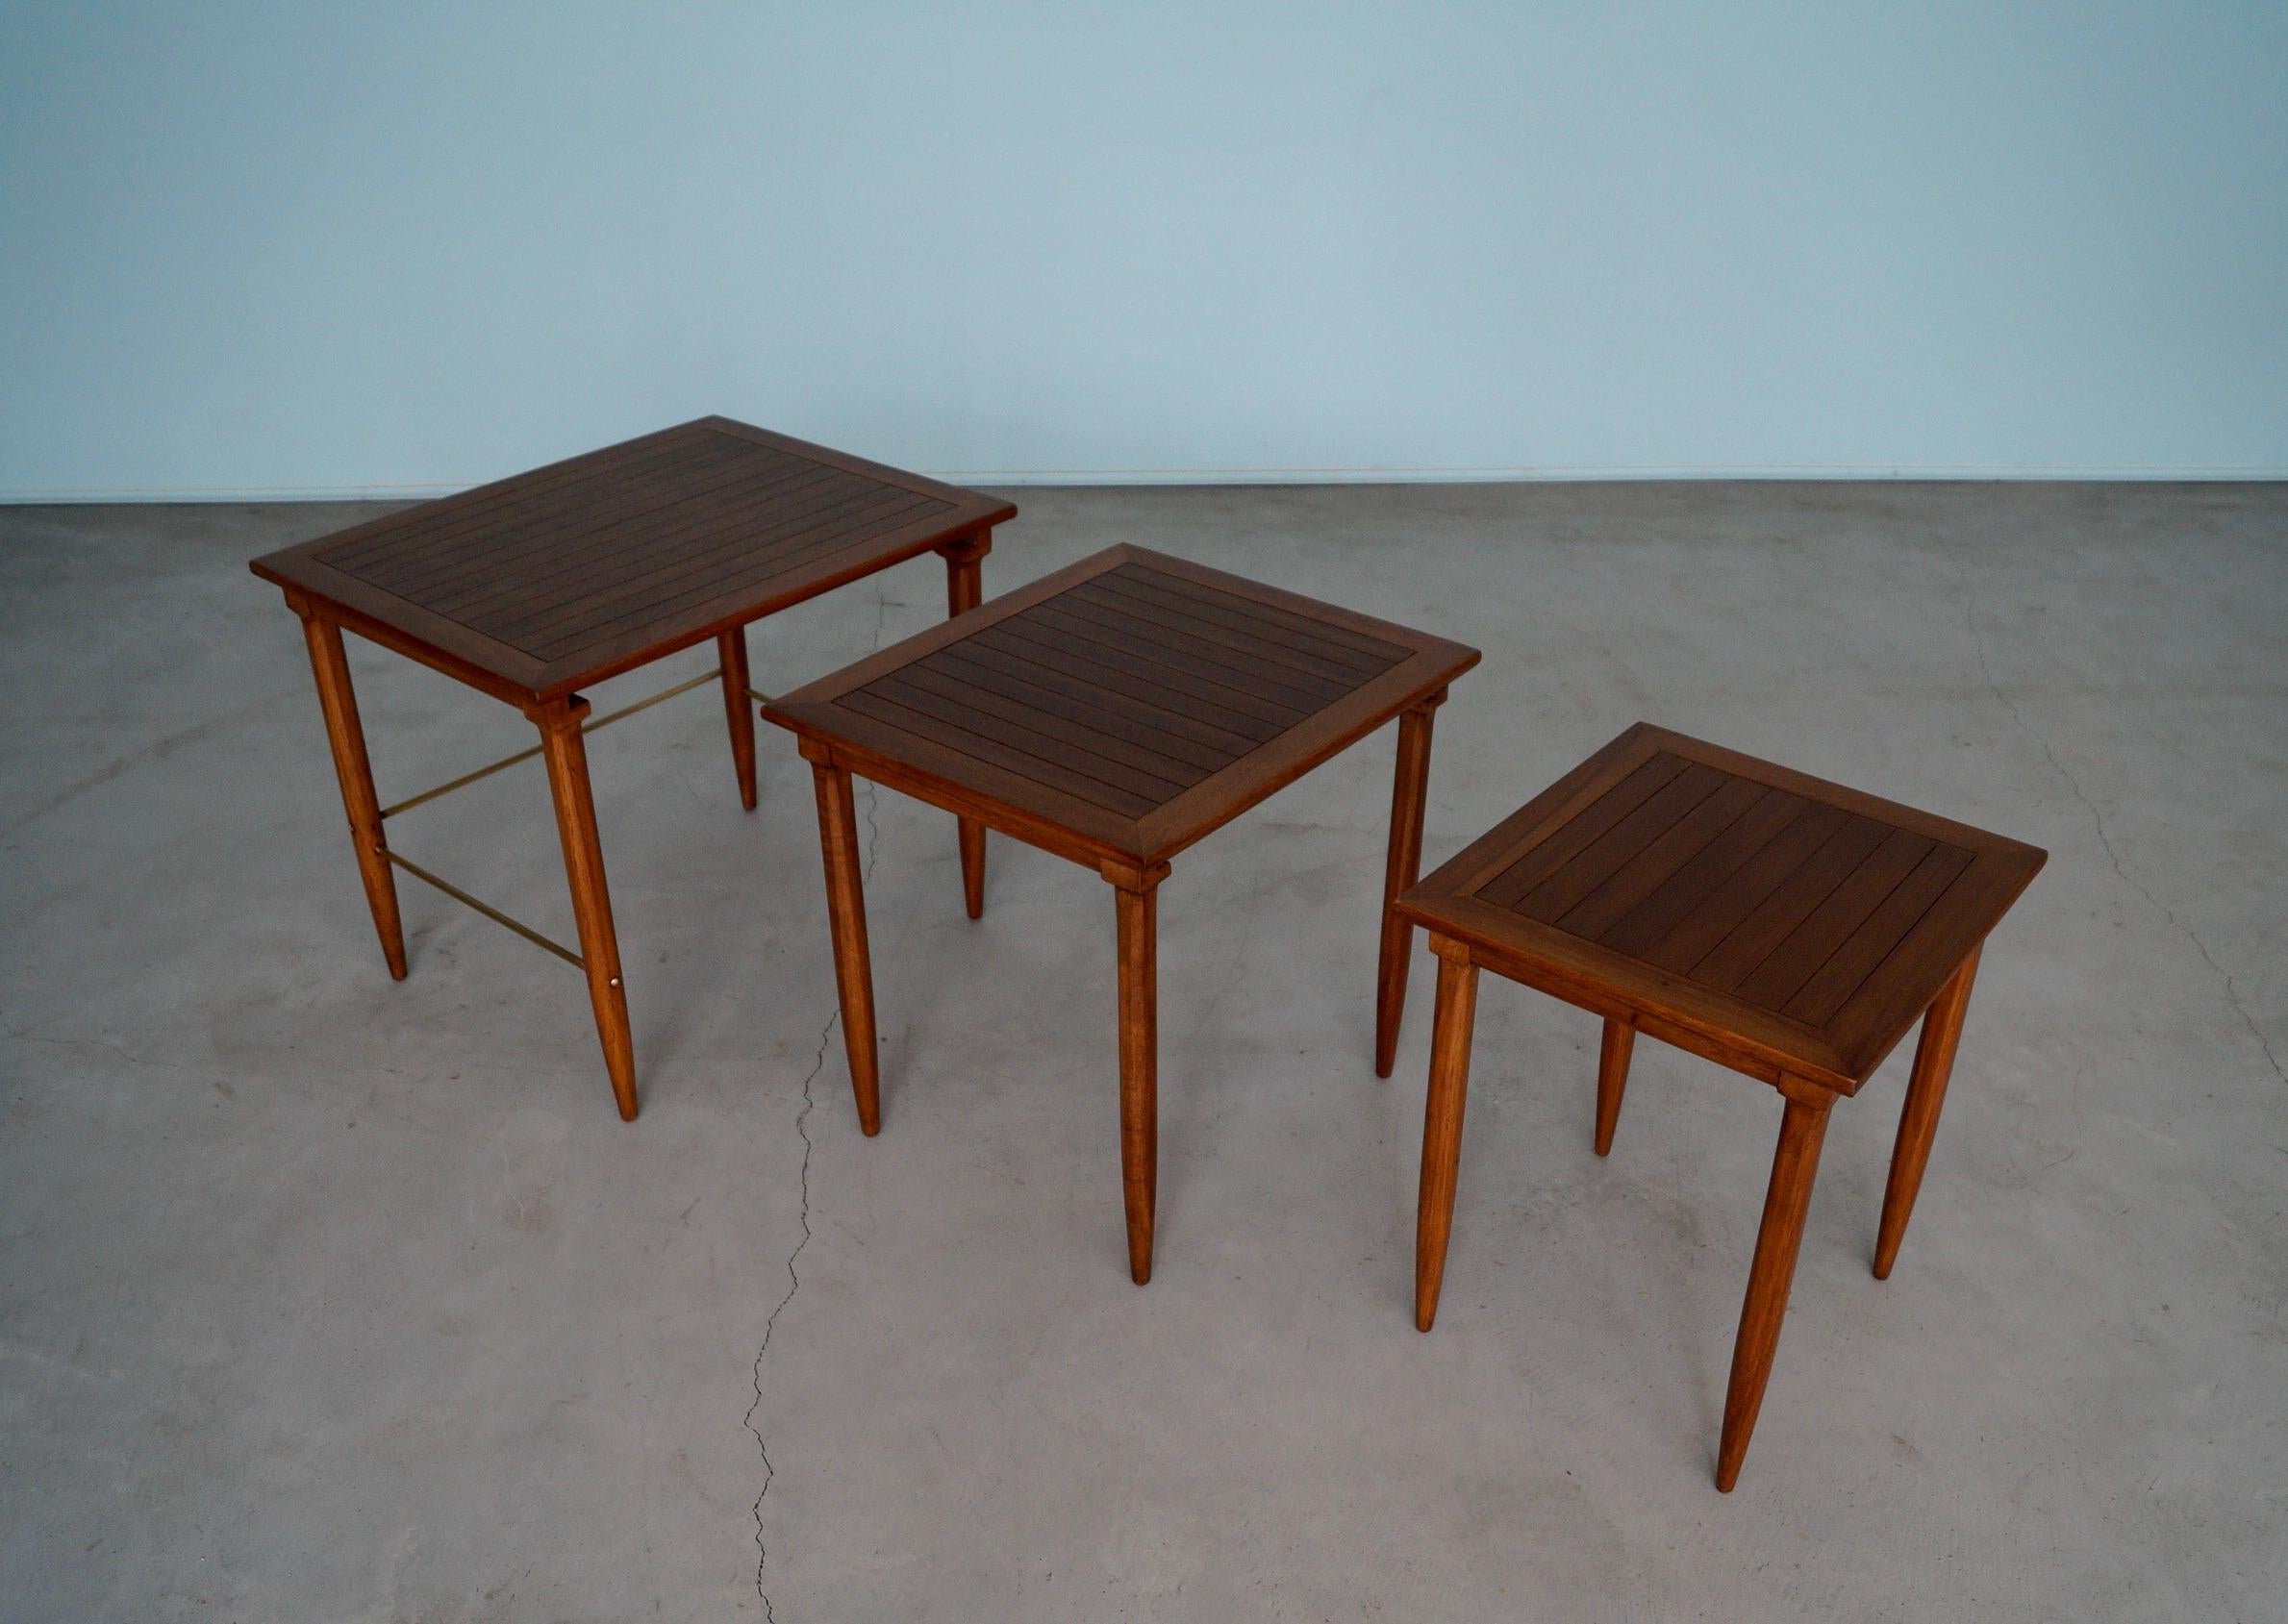 1950's Mid-Century Modern Set of 3 Nesting Tables by Tomlinson In Excellent Condition For Sale In Burbank, CA